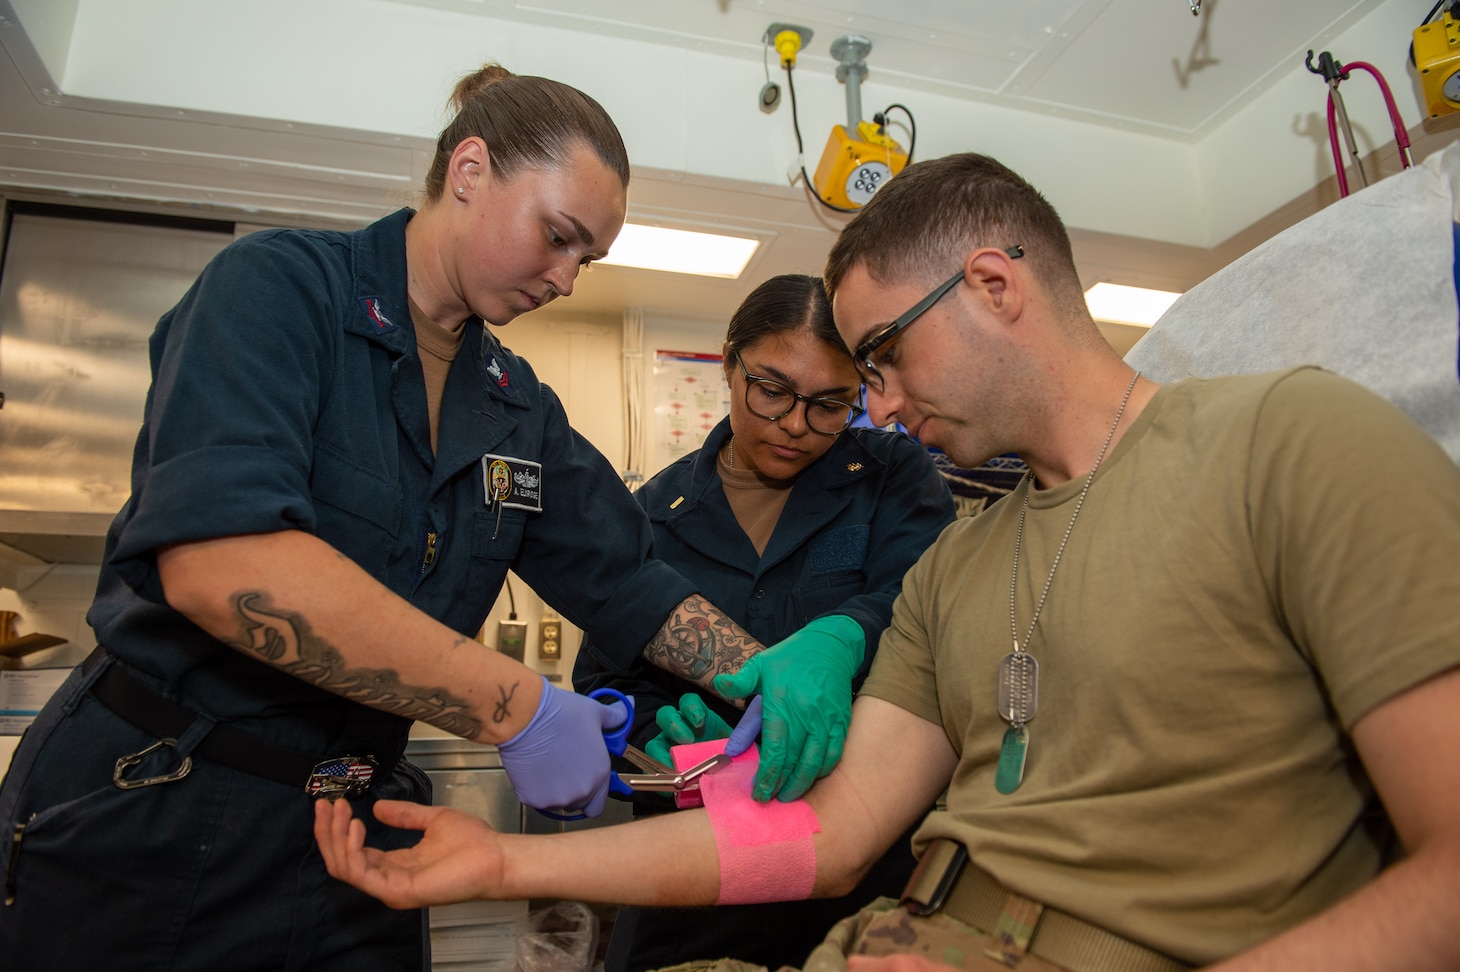 SAN DIEGO (July 26, 2023) Ensign Ilana Silva, a native of El Centro, California, observes as Hospital Corpsman 2nd Class Amanda Eldridge, a native of Nashville, Tennessee, demonstrates how to apply gauze to a wound during training in the medical bay of USS Boxer (LHD 4). Silva is one of eight second-year medical students from the Army, Air Force and Navy enrolled at the Uniformed Services University of the Health Sciences (USU) who spent two weeks onboard USS Boxer (LHD 4) training in operational medicine (OPMED). Boxer is a Wasp-class amphibious assault ship homeported in San Diego. (U.S. Navy photo by Mass Communication Specialist 2nd Class Connor Burns)